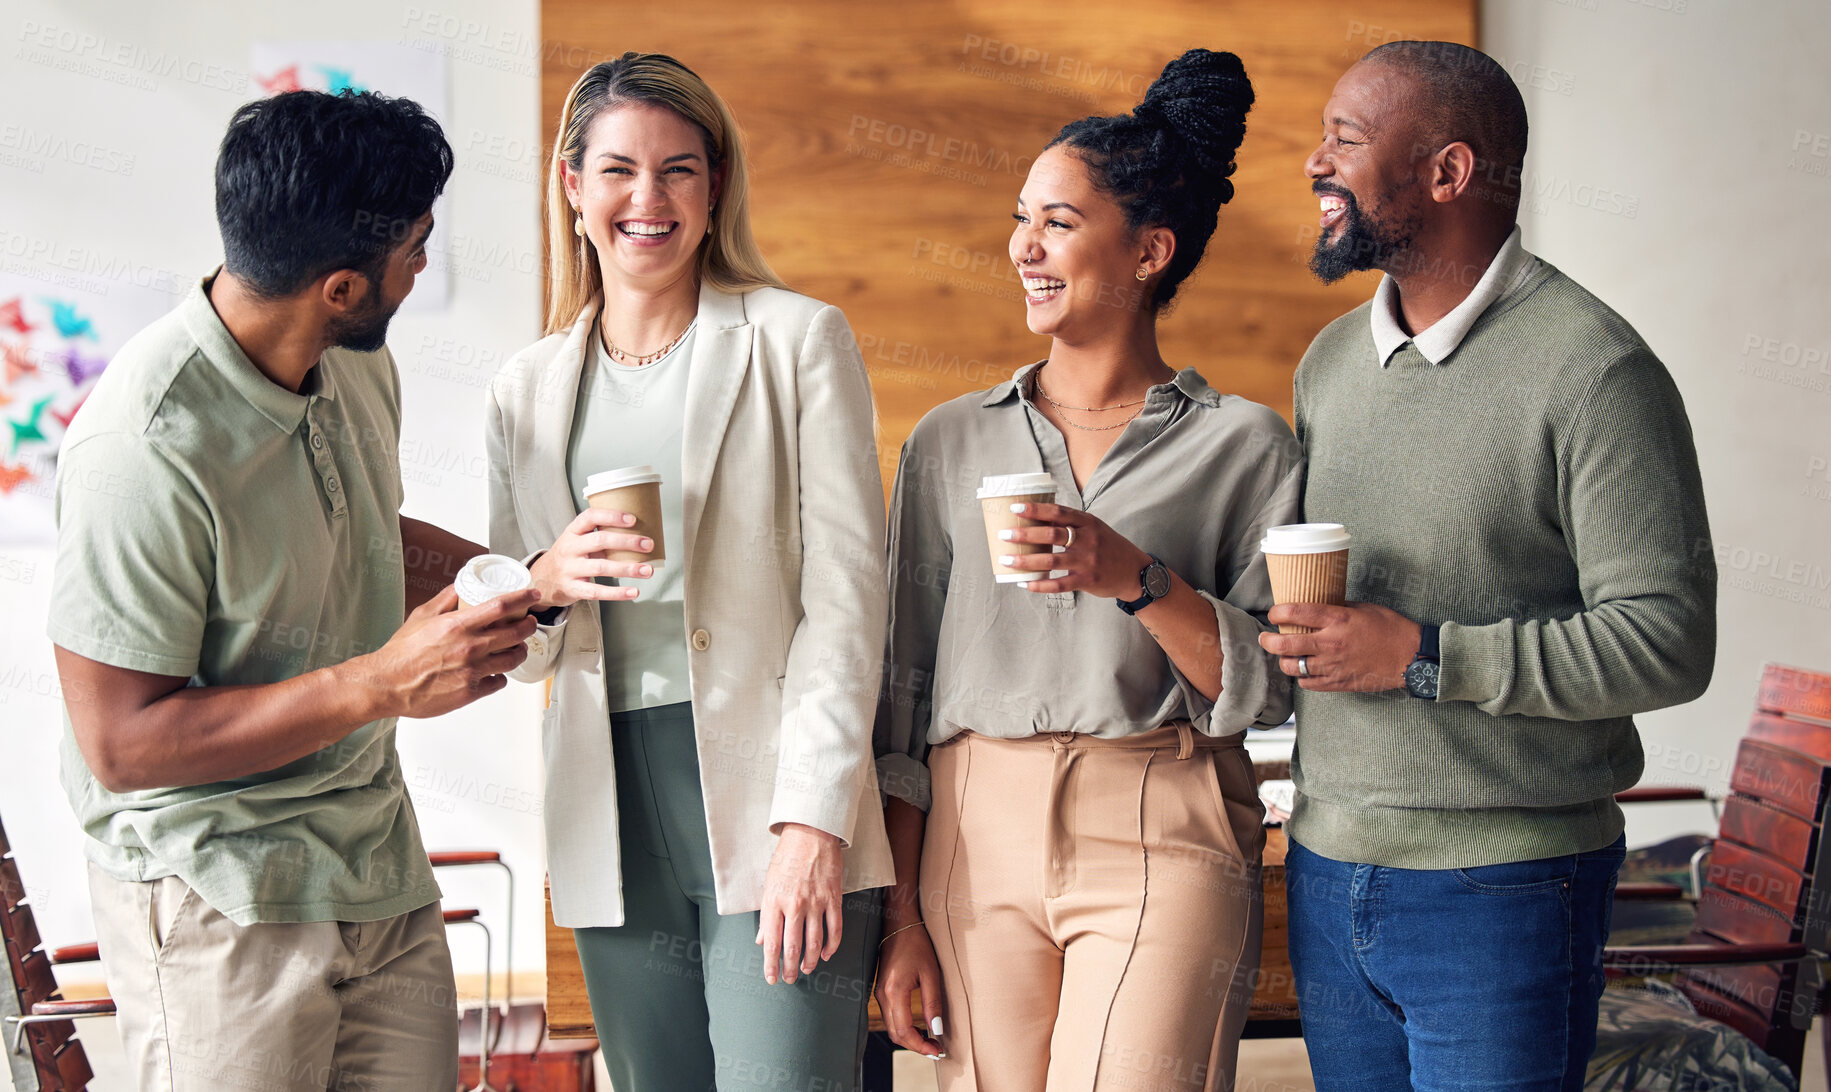 Buy stock photo Startup business people, coffee break chat and happy together with team building, laughter and funny time. Men, women and drink with comic talk, friends and happiness in workplace with diversity